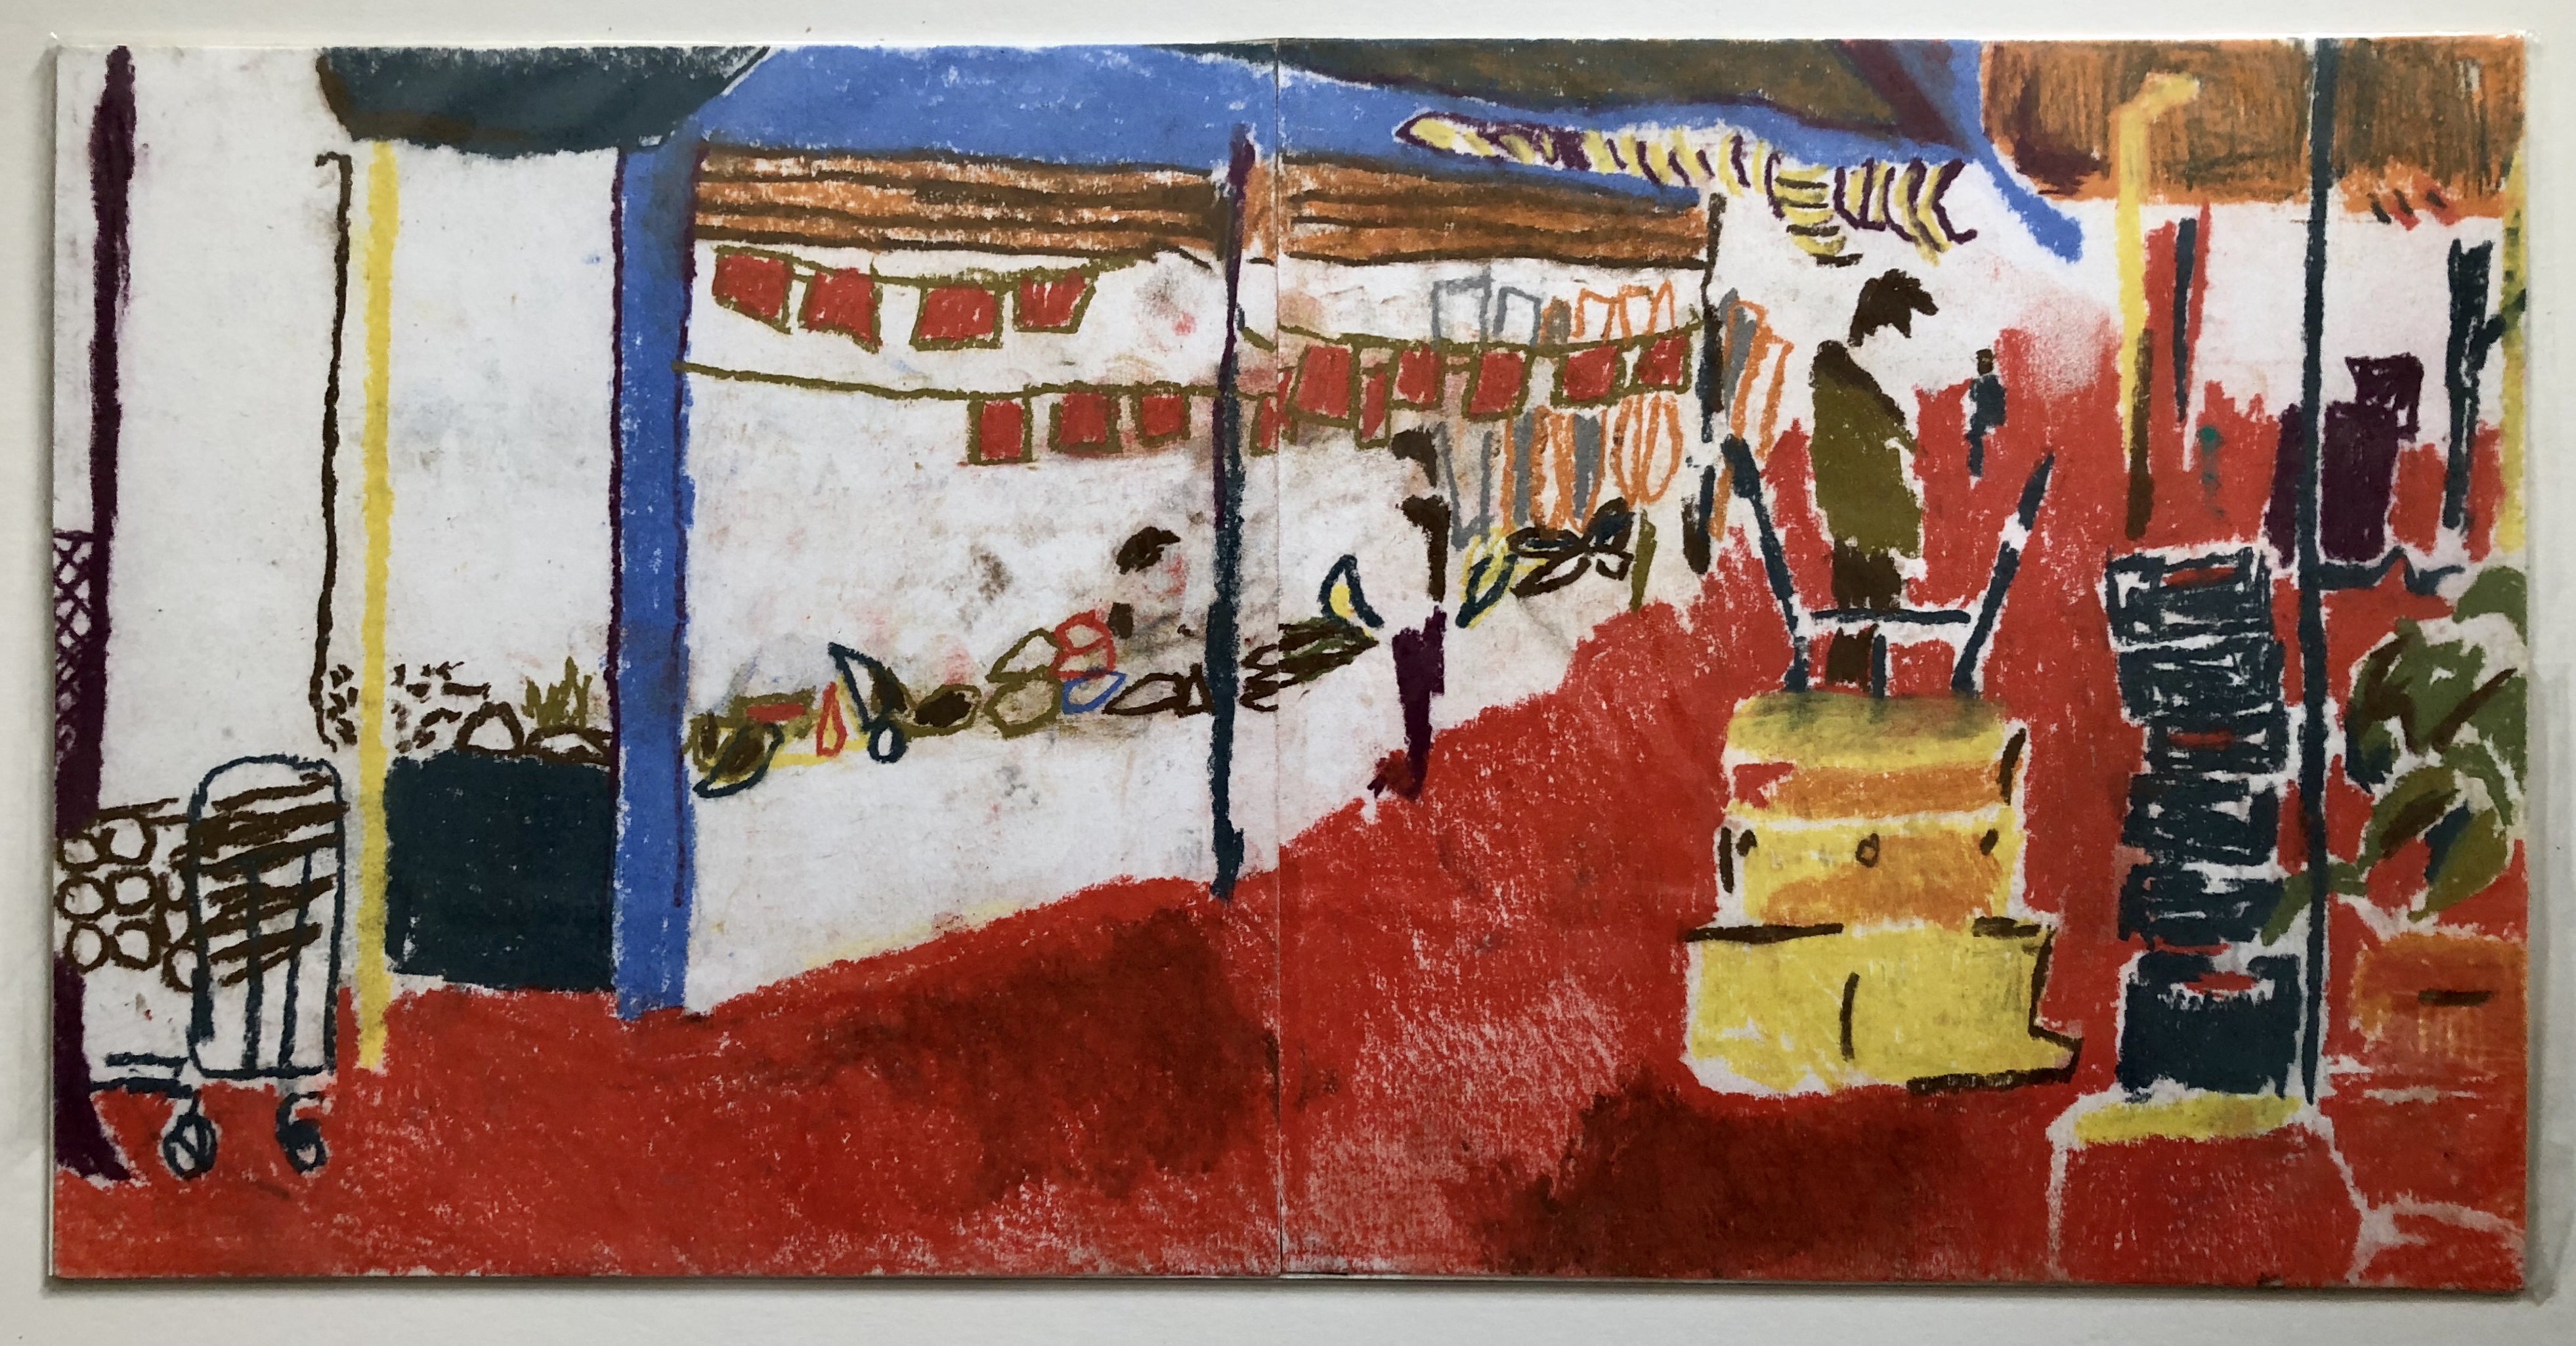 Christabel Forbes, Dalston Market Red, 